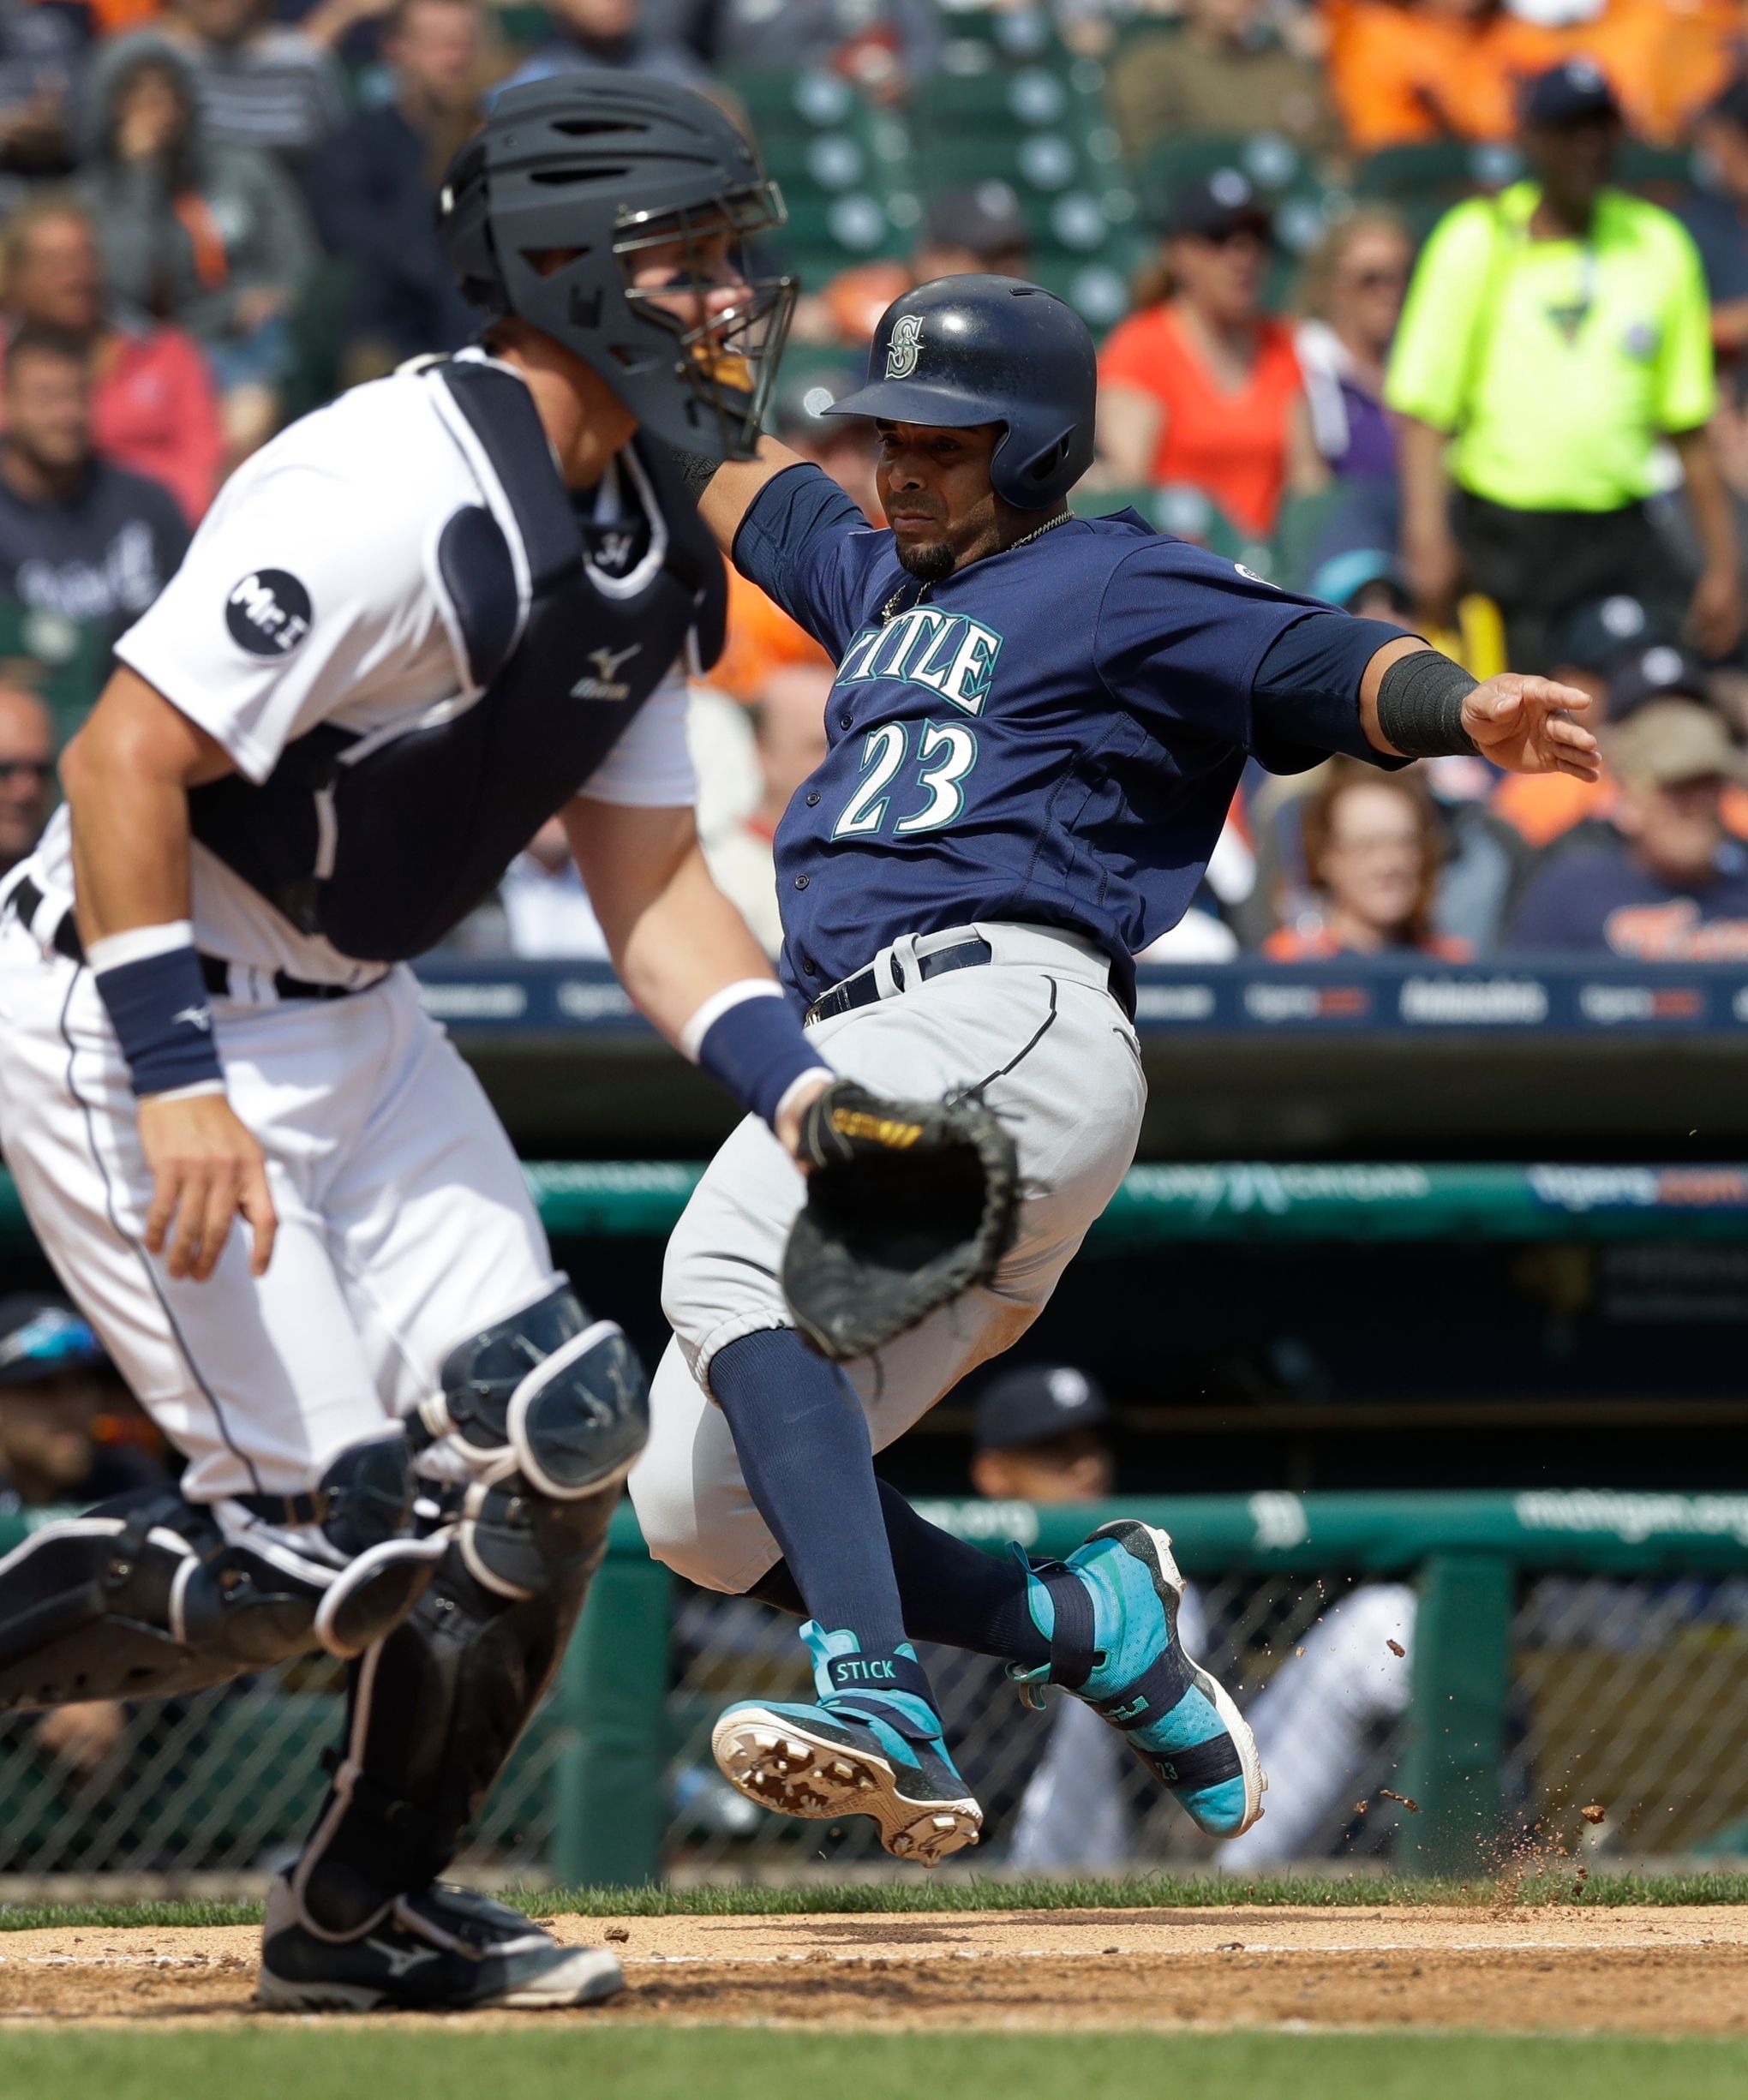 Nelson Cruz Named to the AL All-Star Team, by Mariners PR